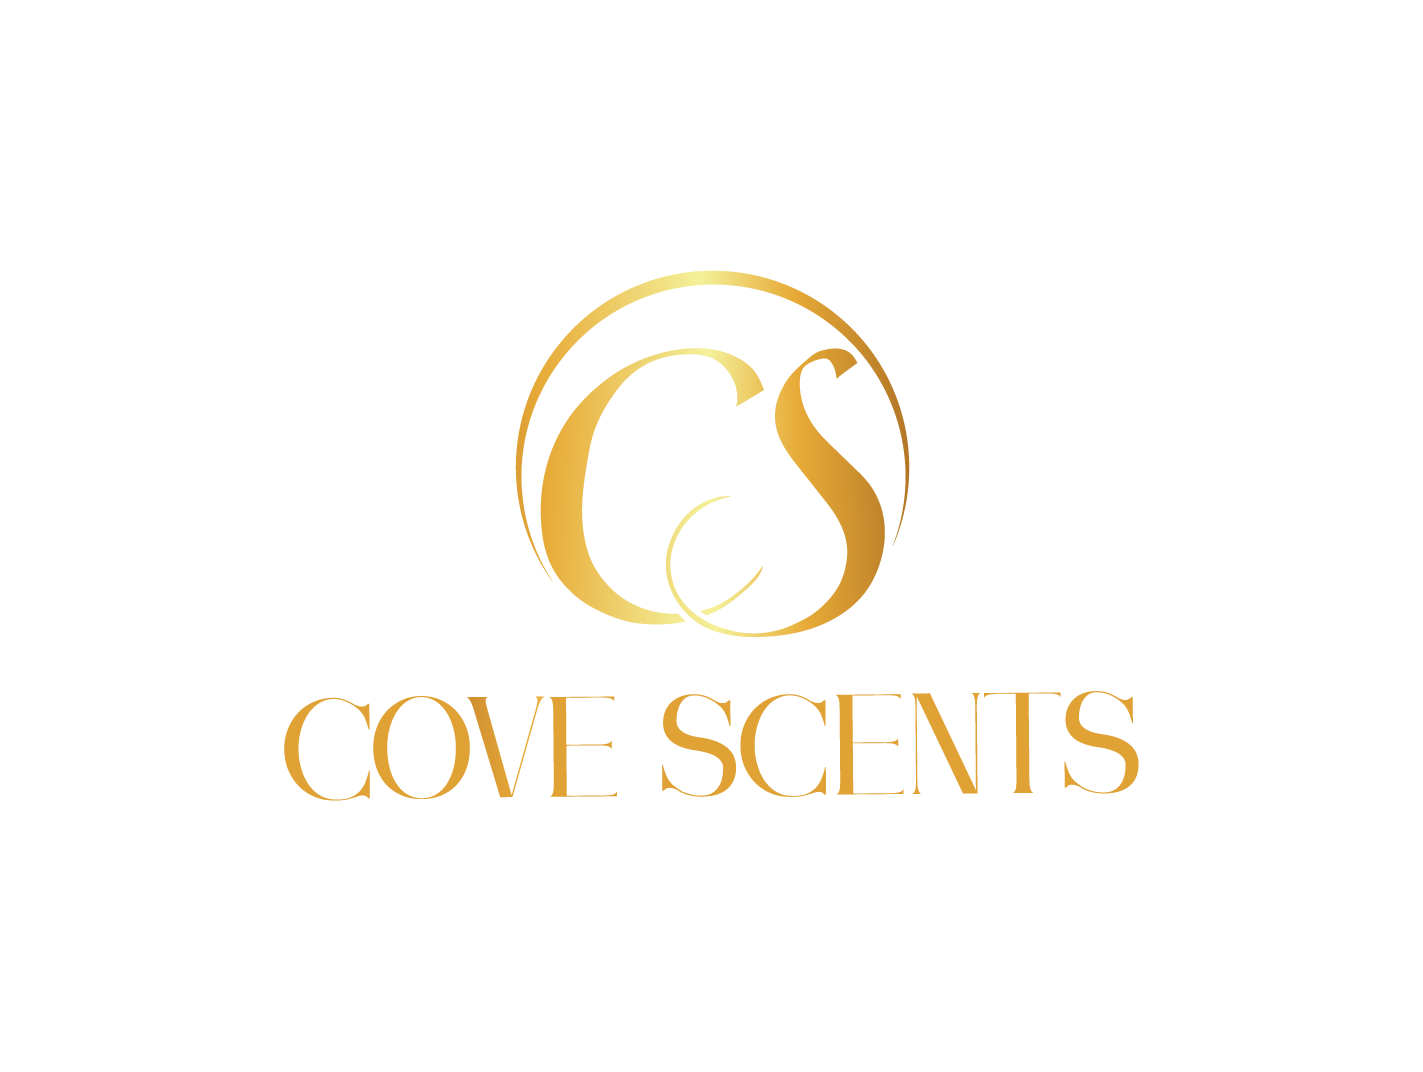 Cove Scents Gift Card